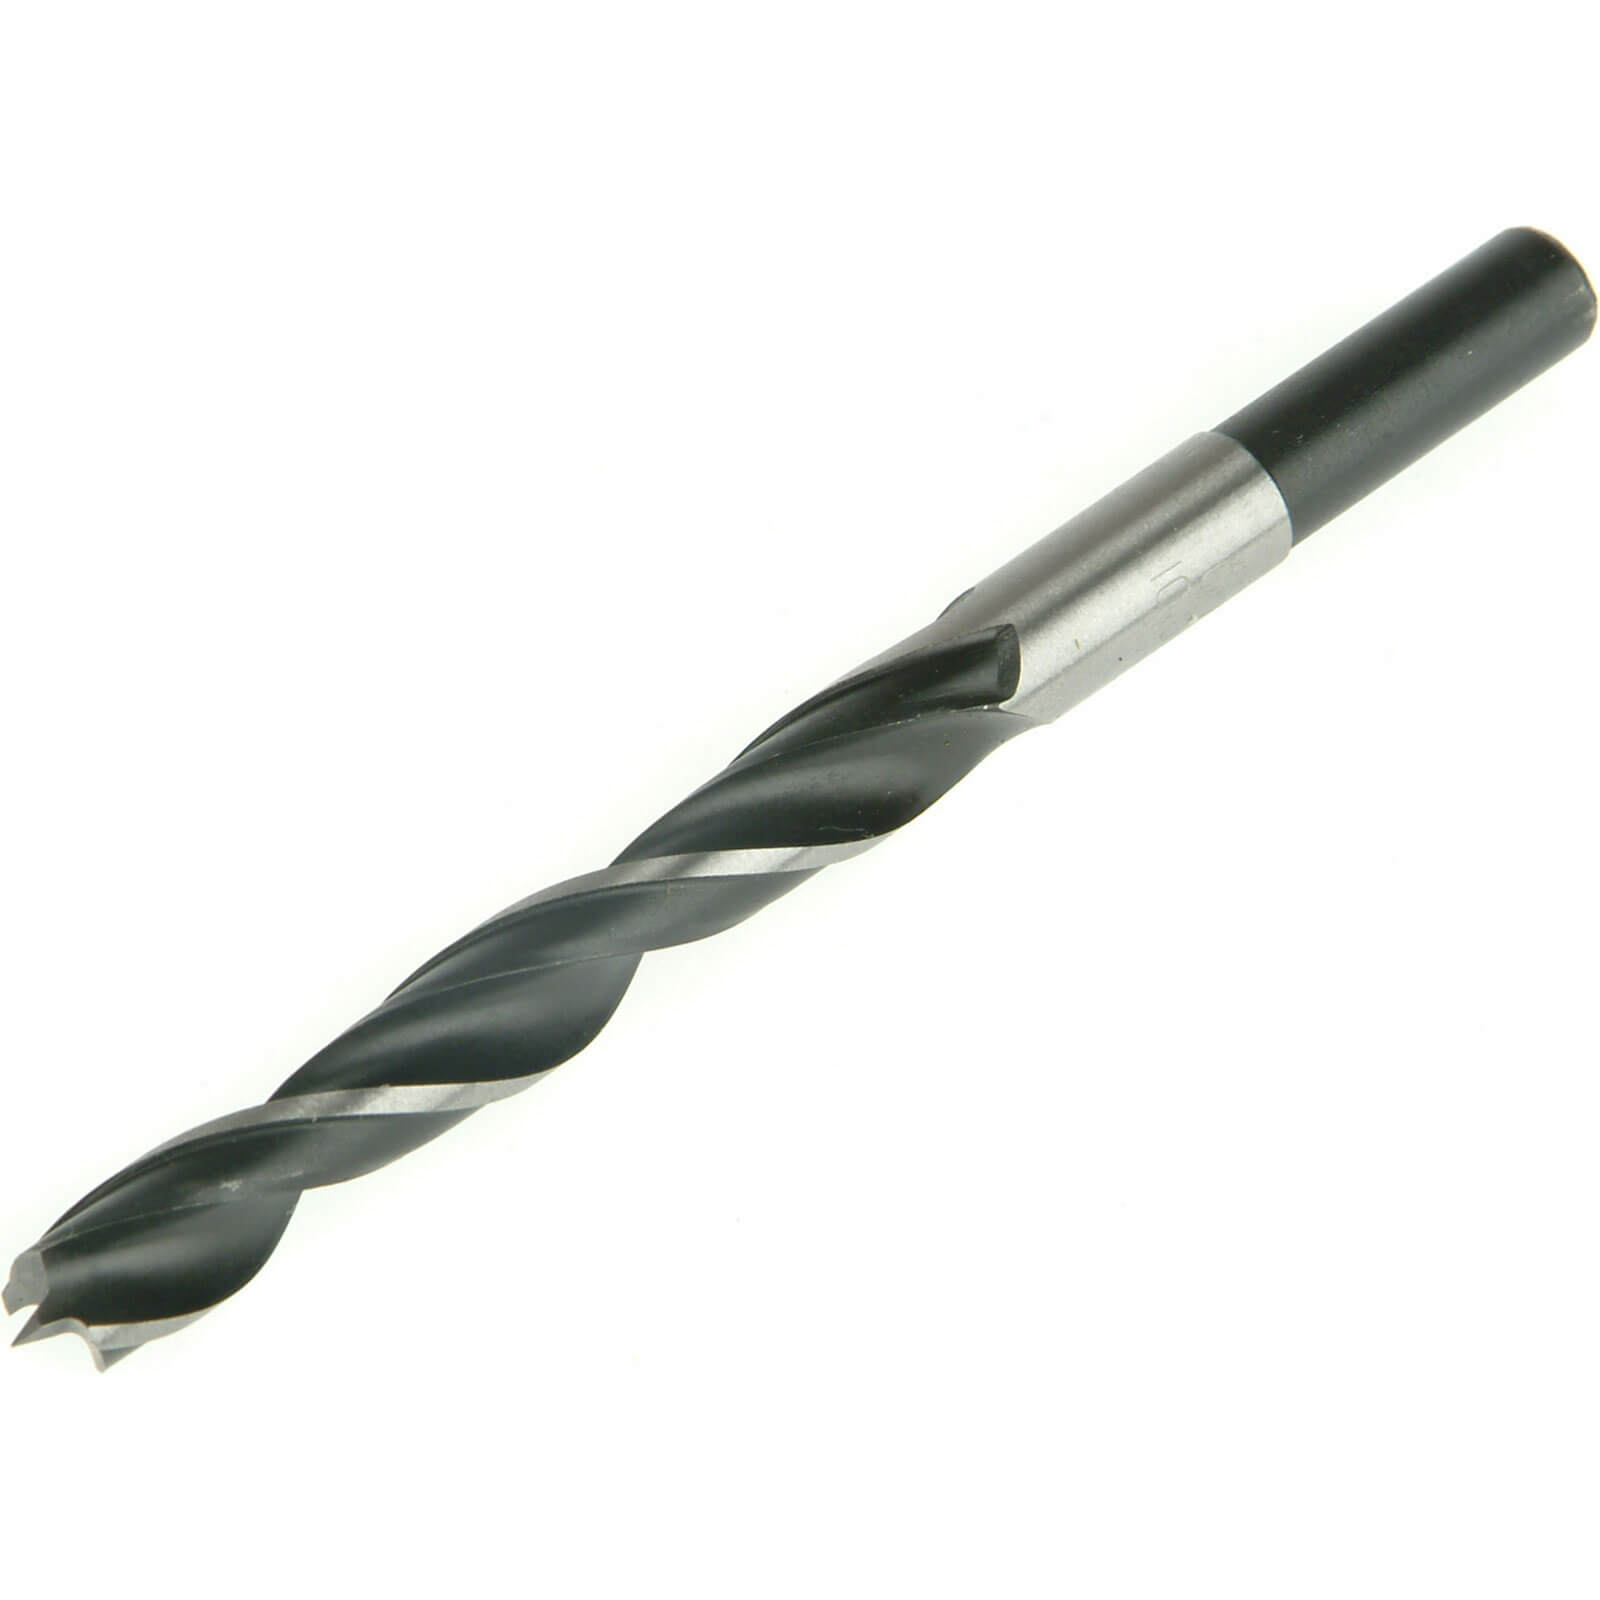 Image of Faithfull Lip and Spur Wood Drill Bit 12mm